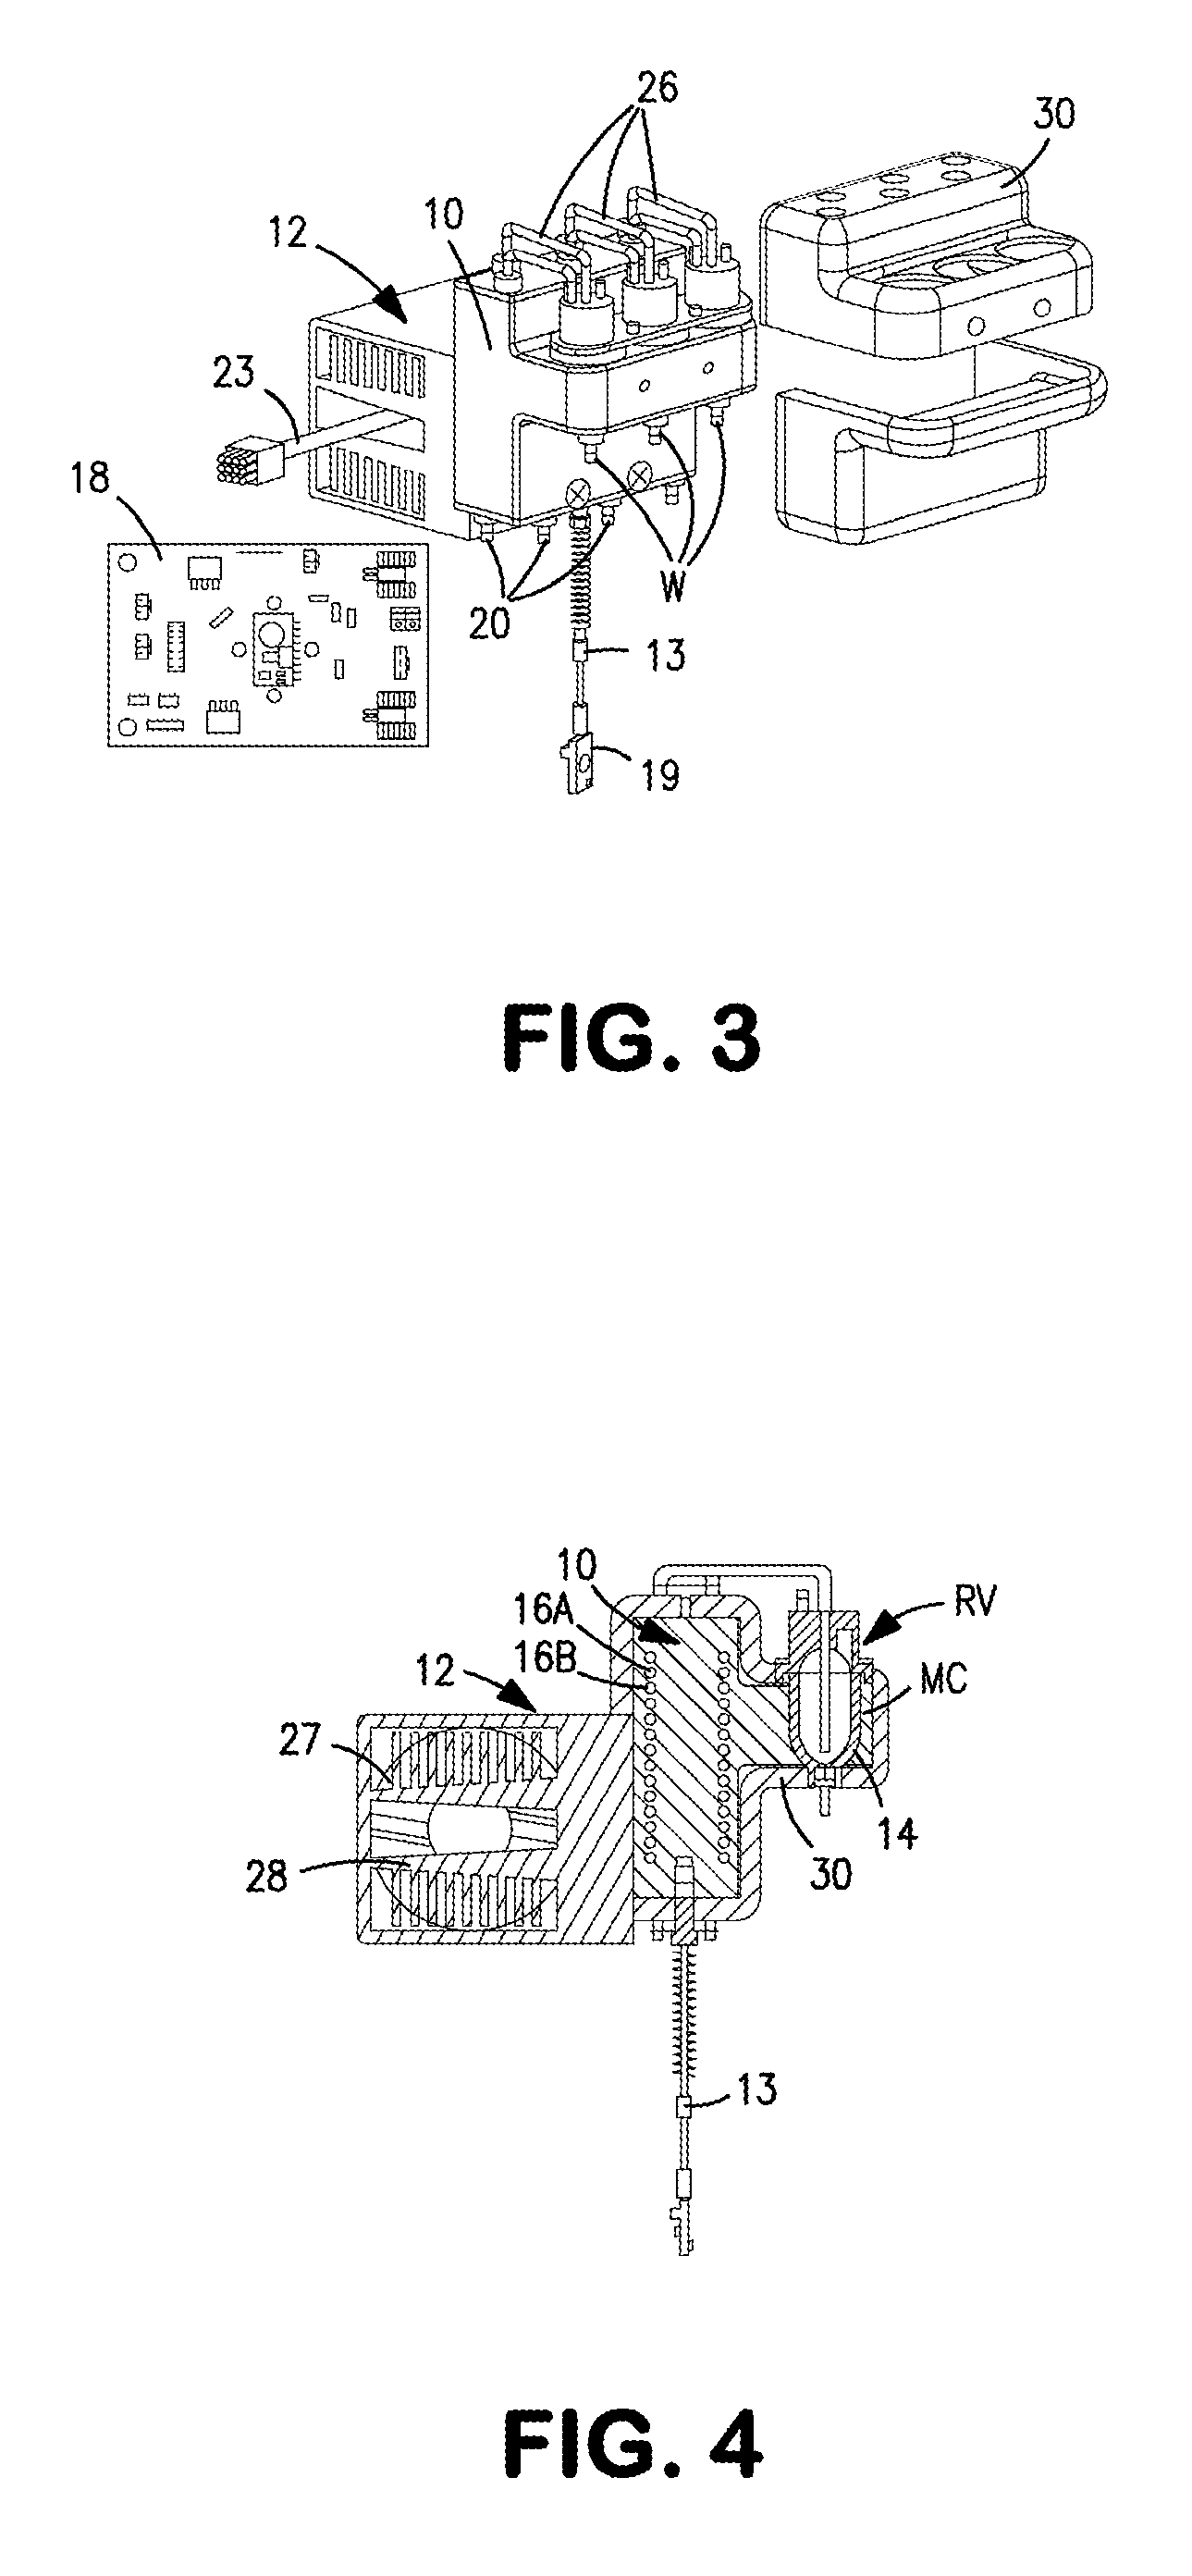 Method and apparatus for controlling reaction temperature in bio-chemical instruments